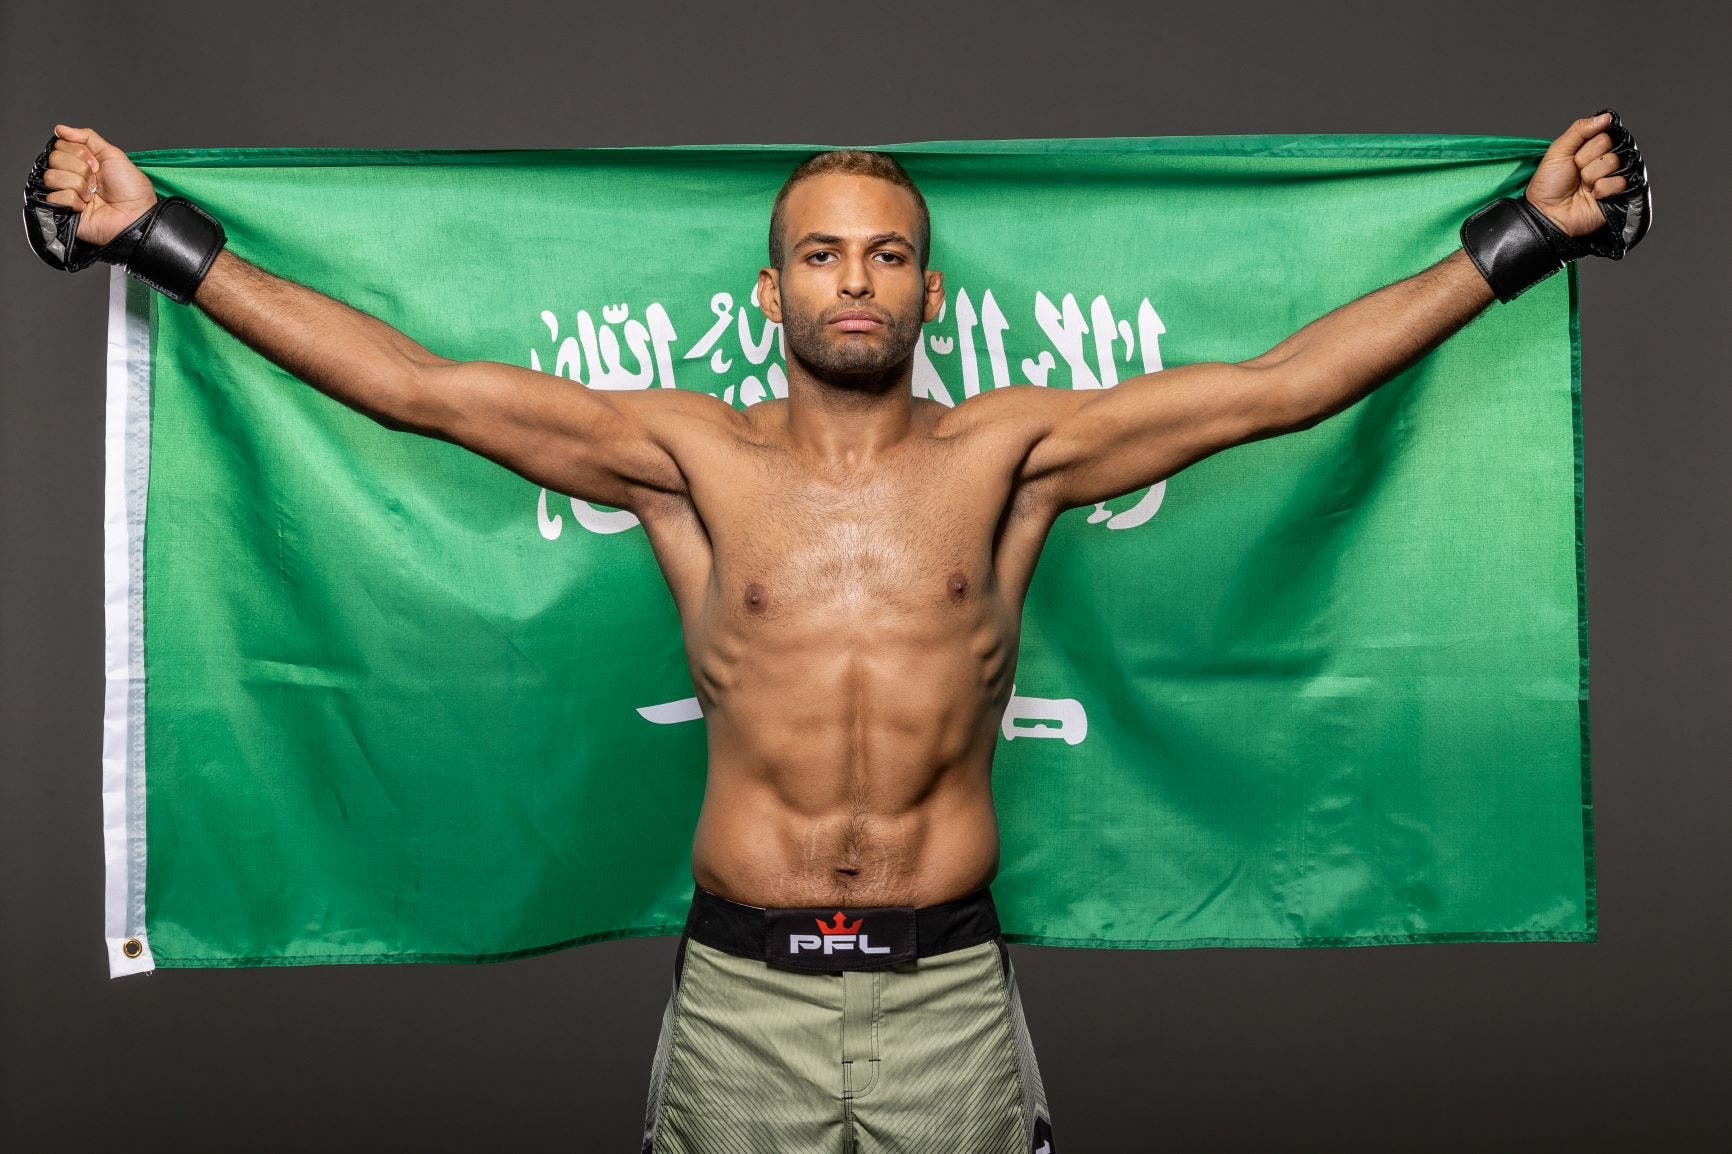 Saudi-based MMA fighter confident ahead of debut in sports second-largest league Al Arabiya English